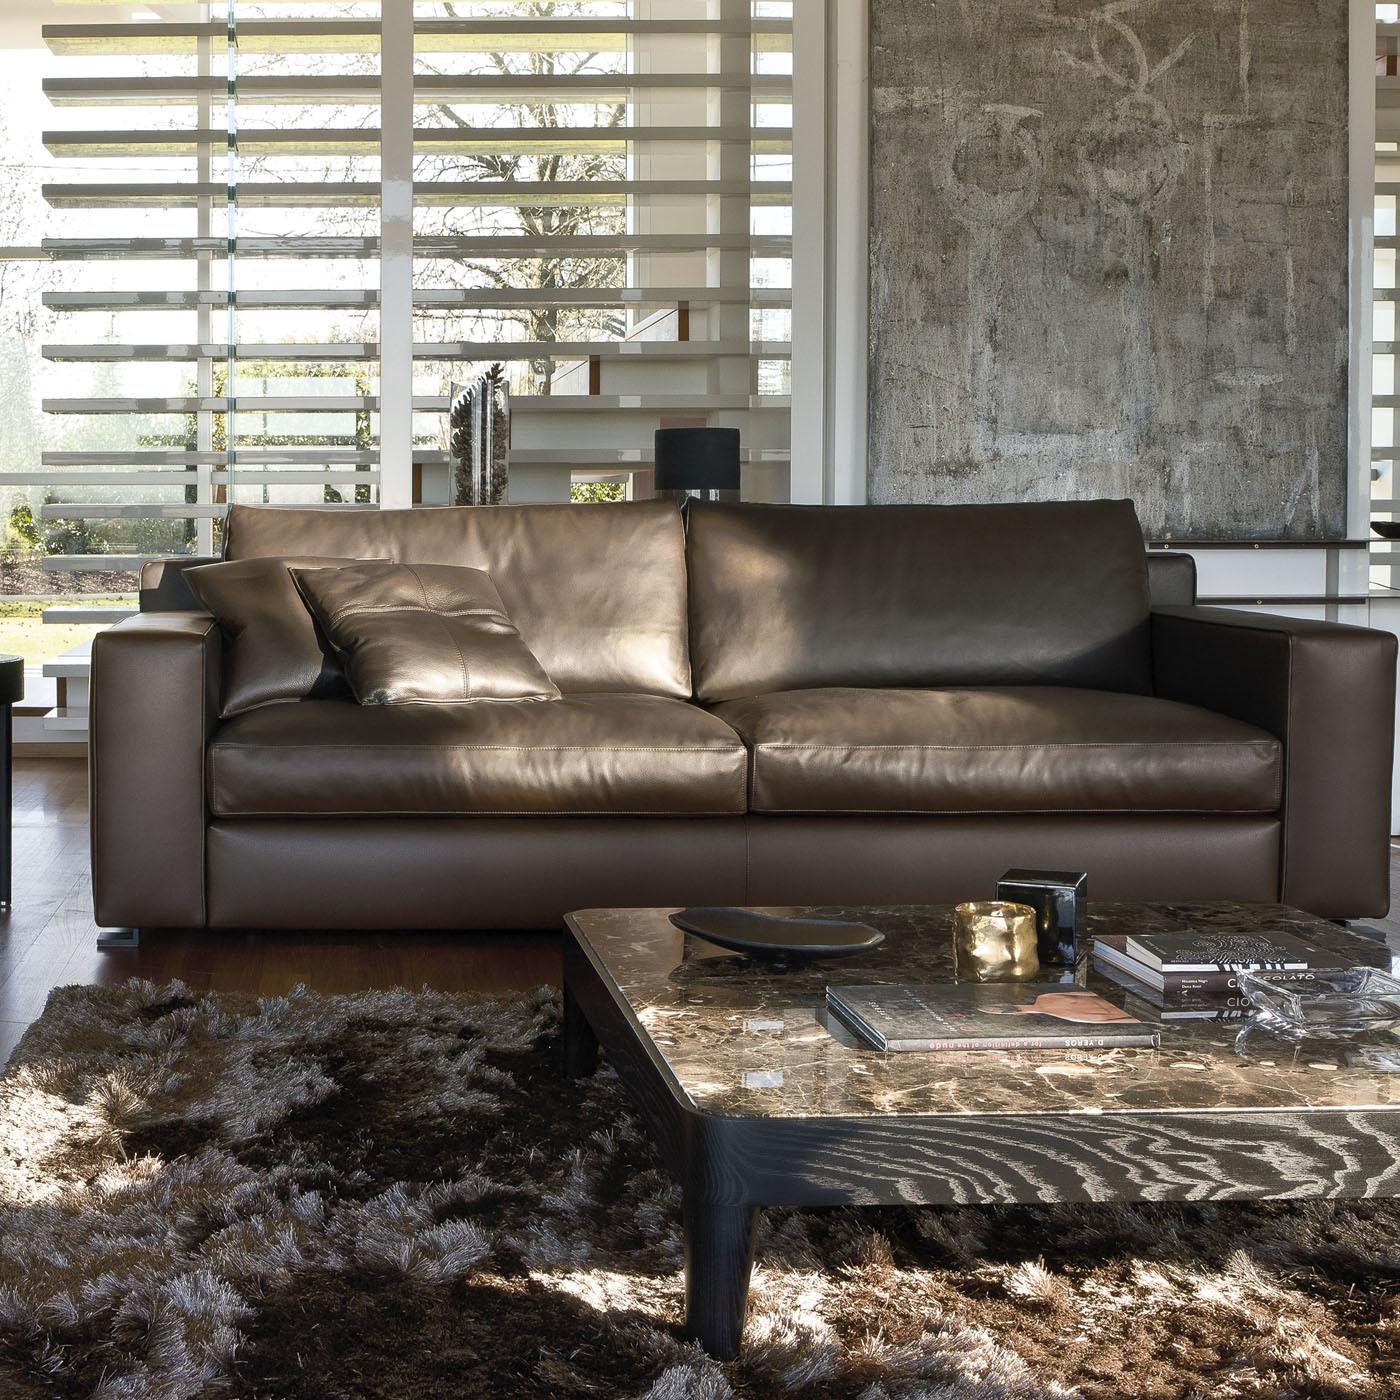 Upholstered in soft mocha-colored leather (col. Cristal 25 cat. Anilina) with matching stitching that adds a luxury feel to its minimalist design, this sofa will be eye-catching in any decor. Its solid and linear design is raised on black square